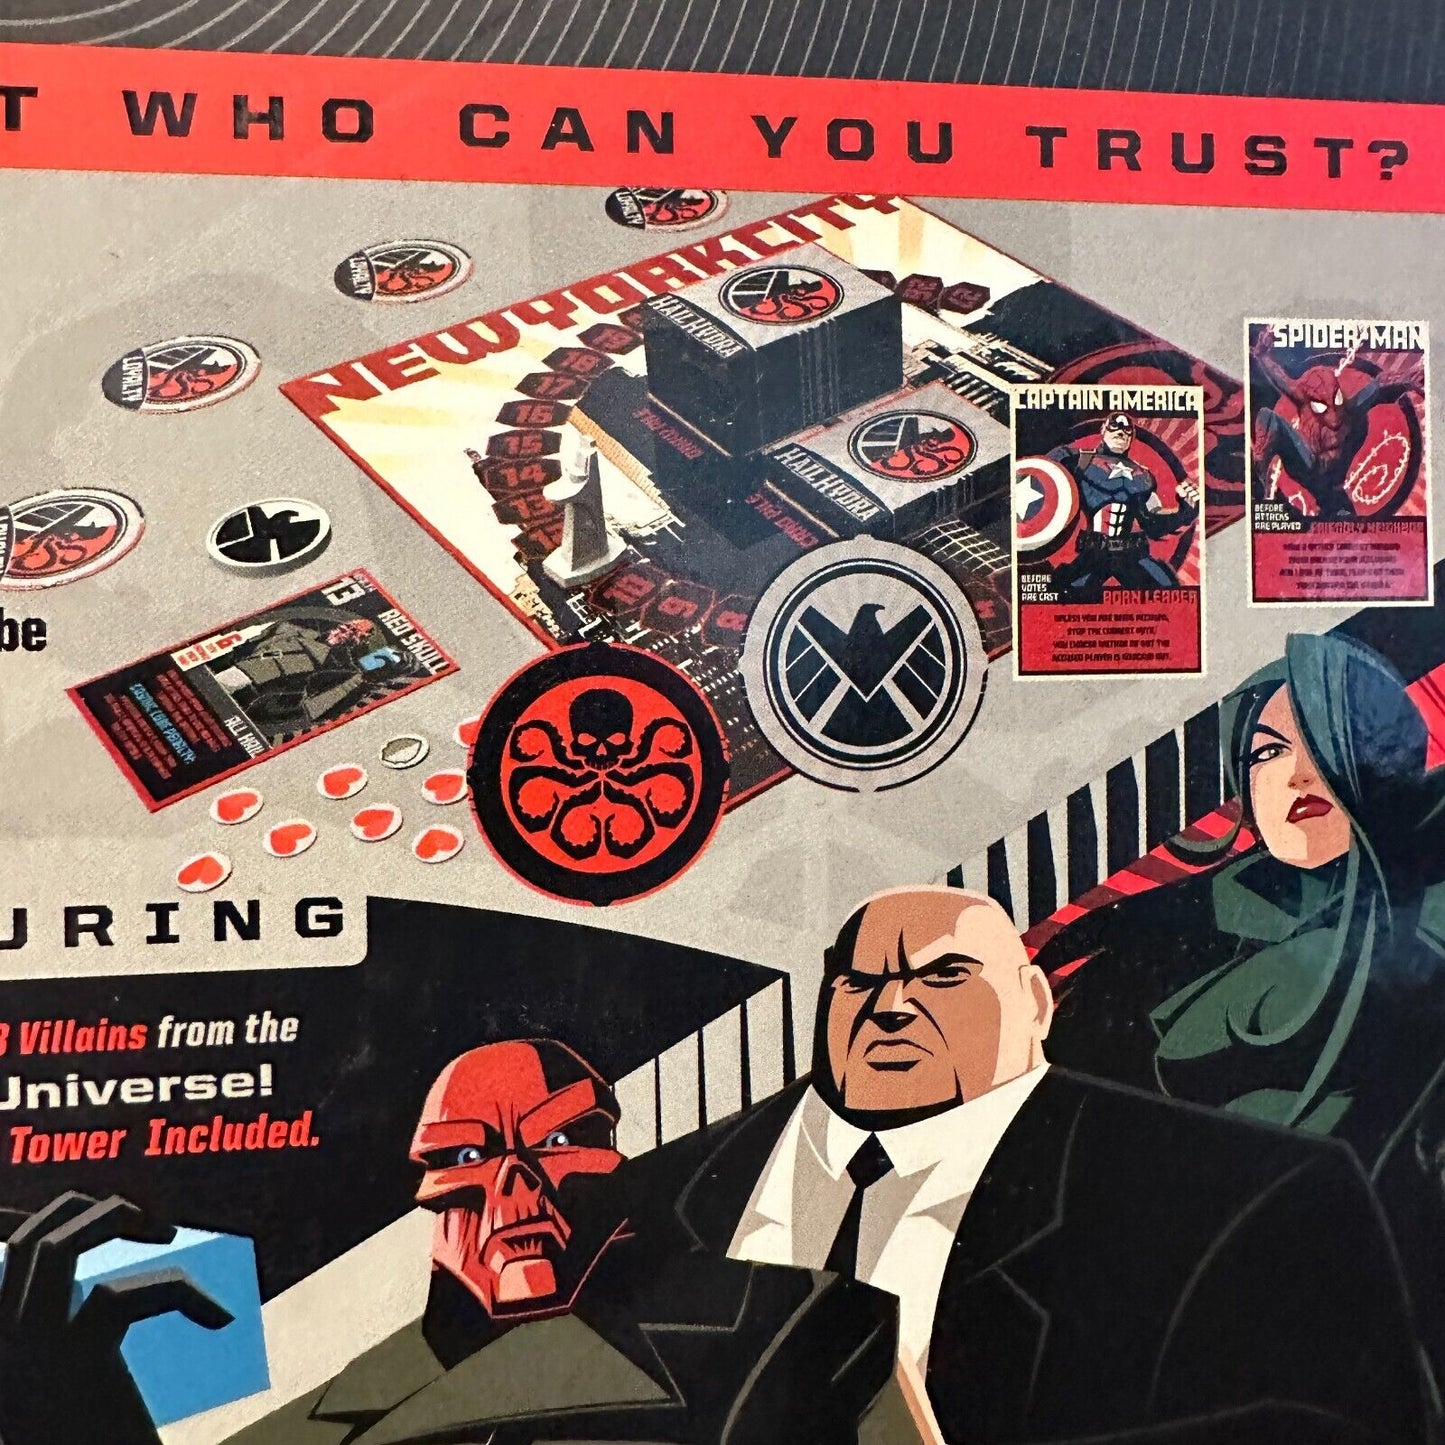 Hail Hydra, Marvel Hero Board Cards Game Agents of Shield Deduction Traitor Play